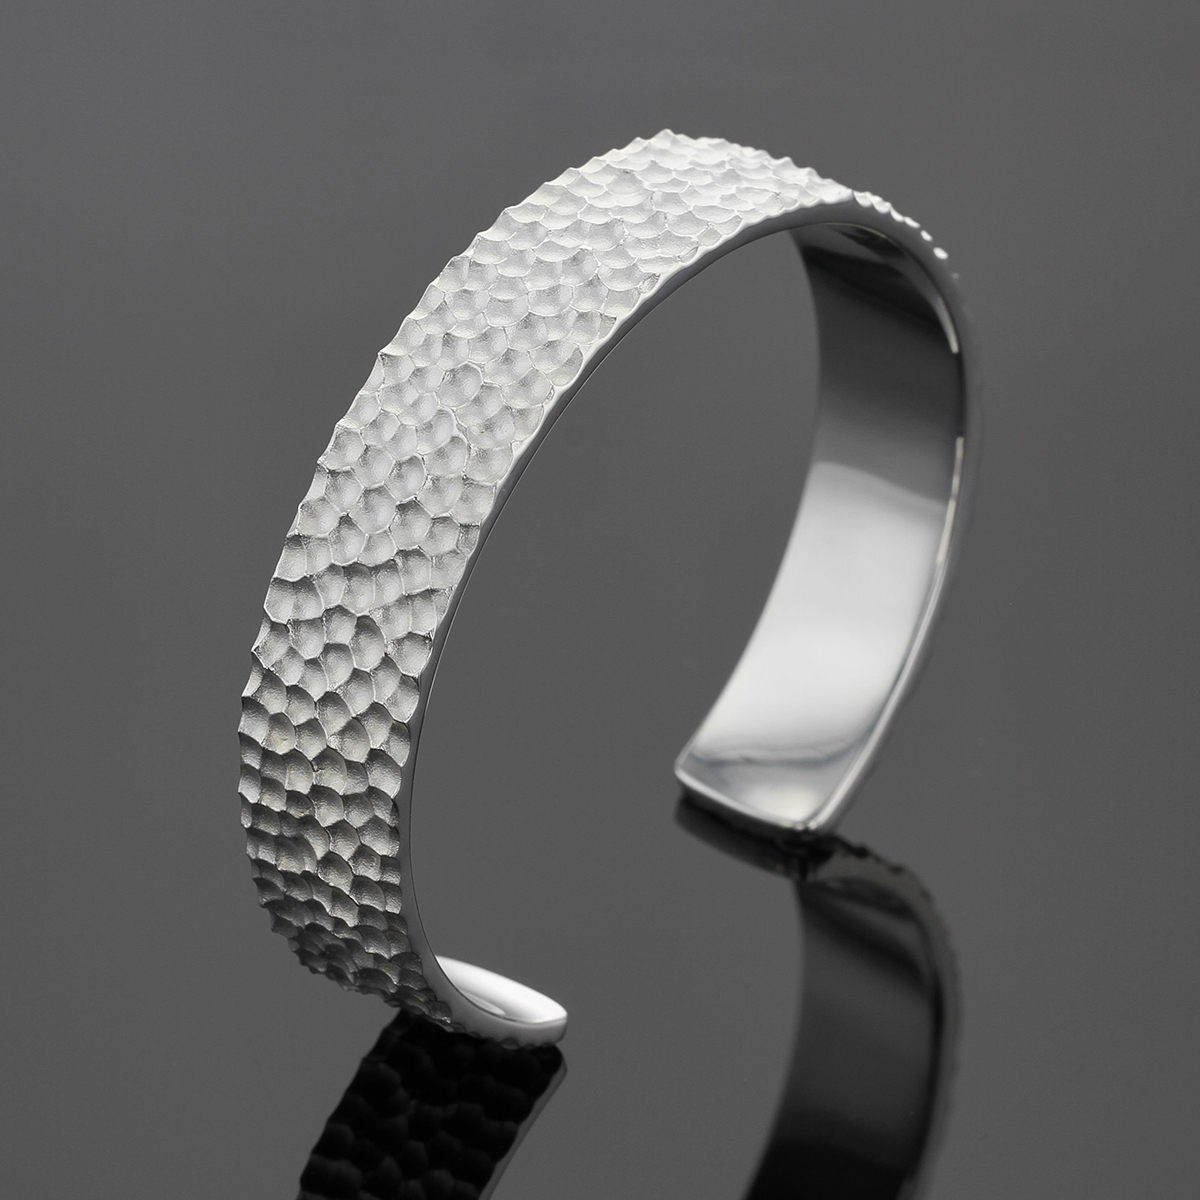 Wide bangle in silver with a hammered rock texture